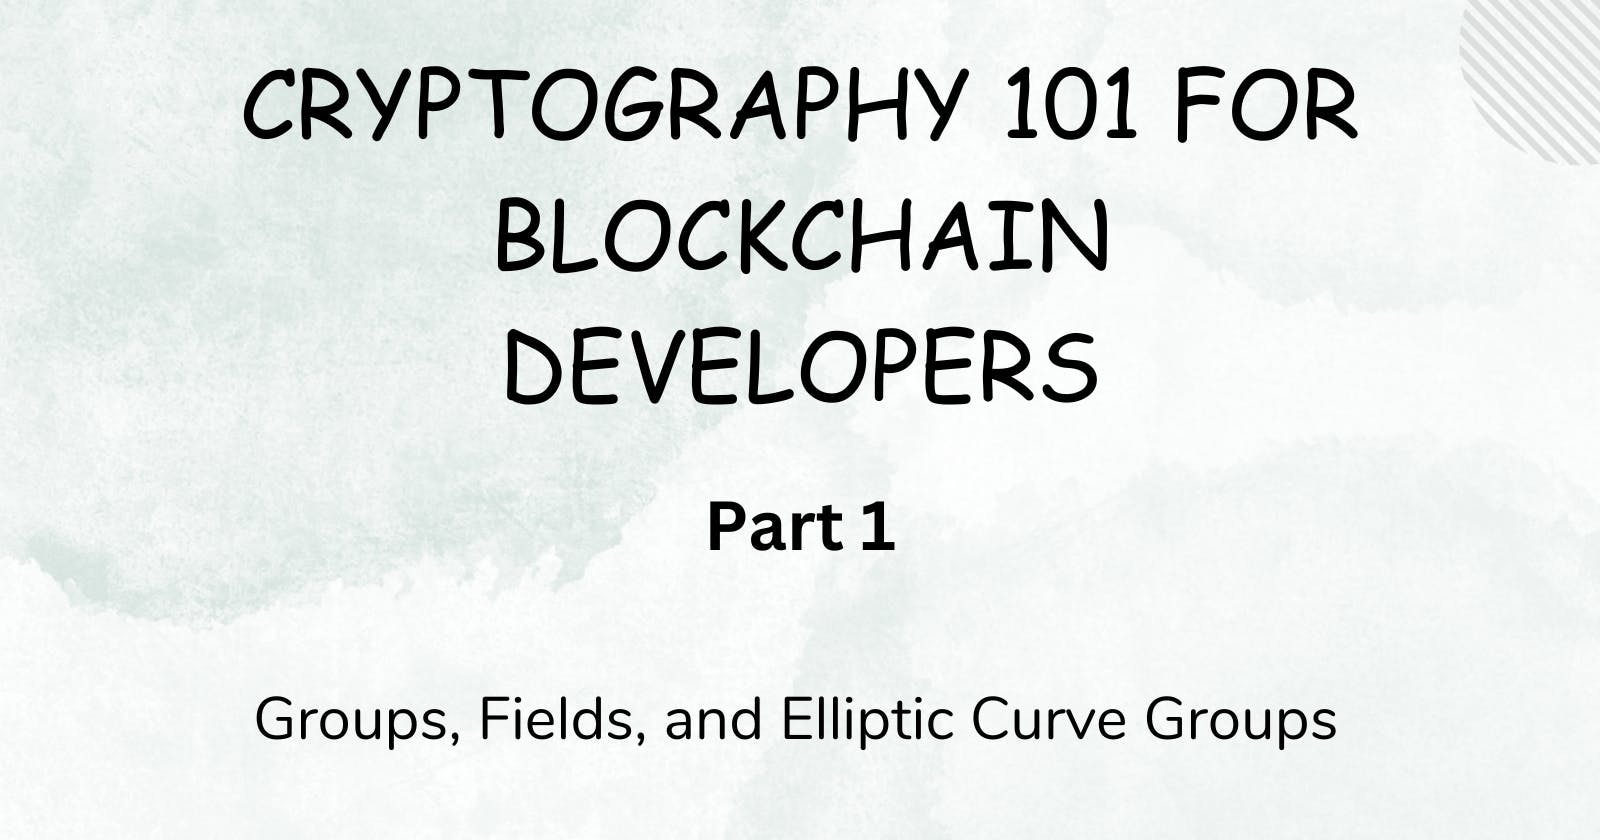 Cryptography 101 for Blockchain Developers (Part 1)